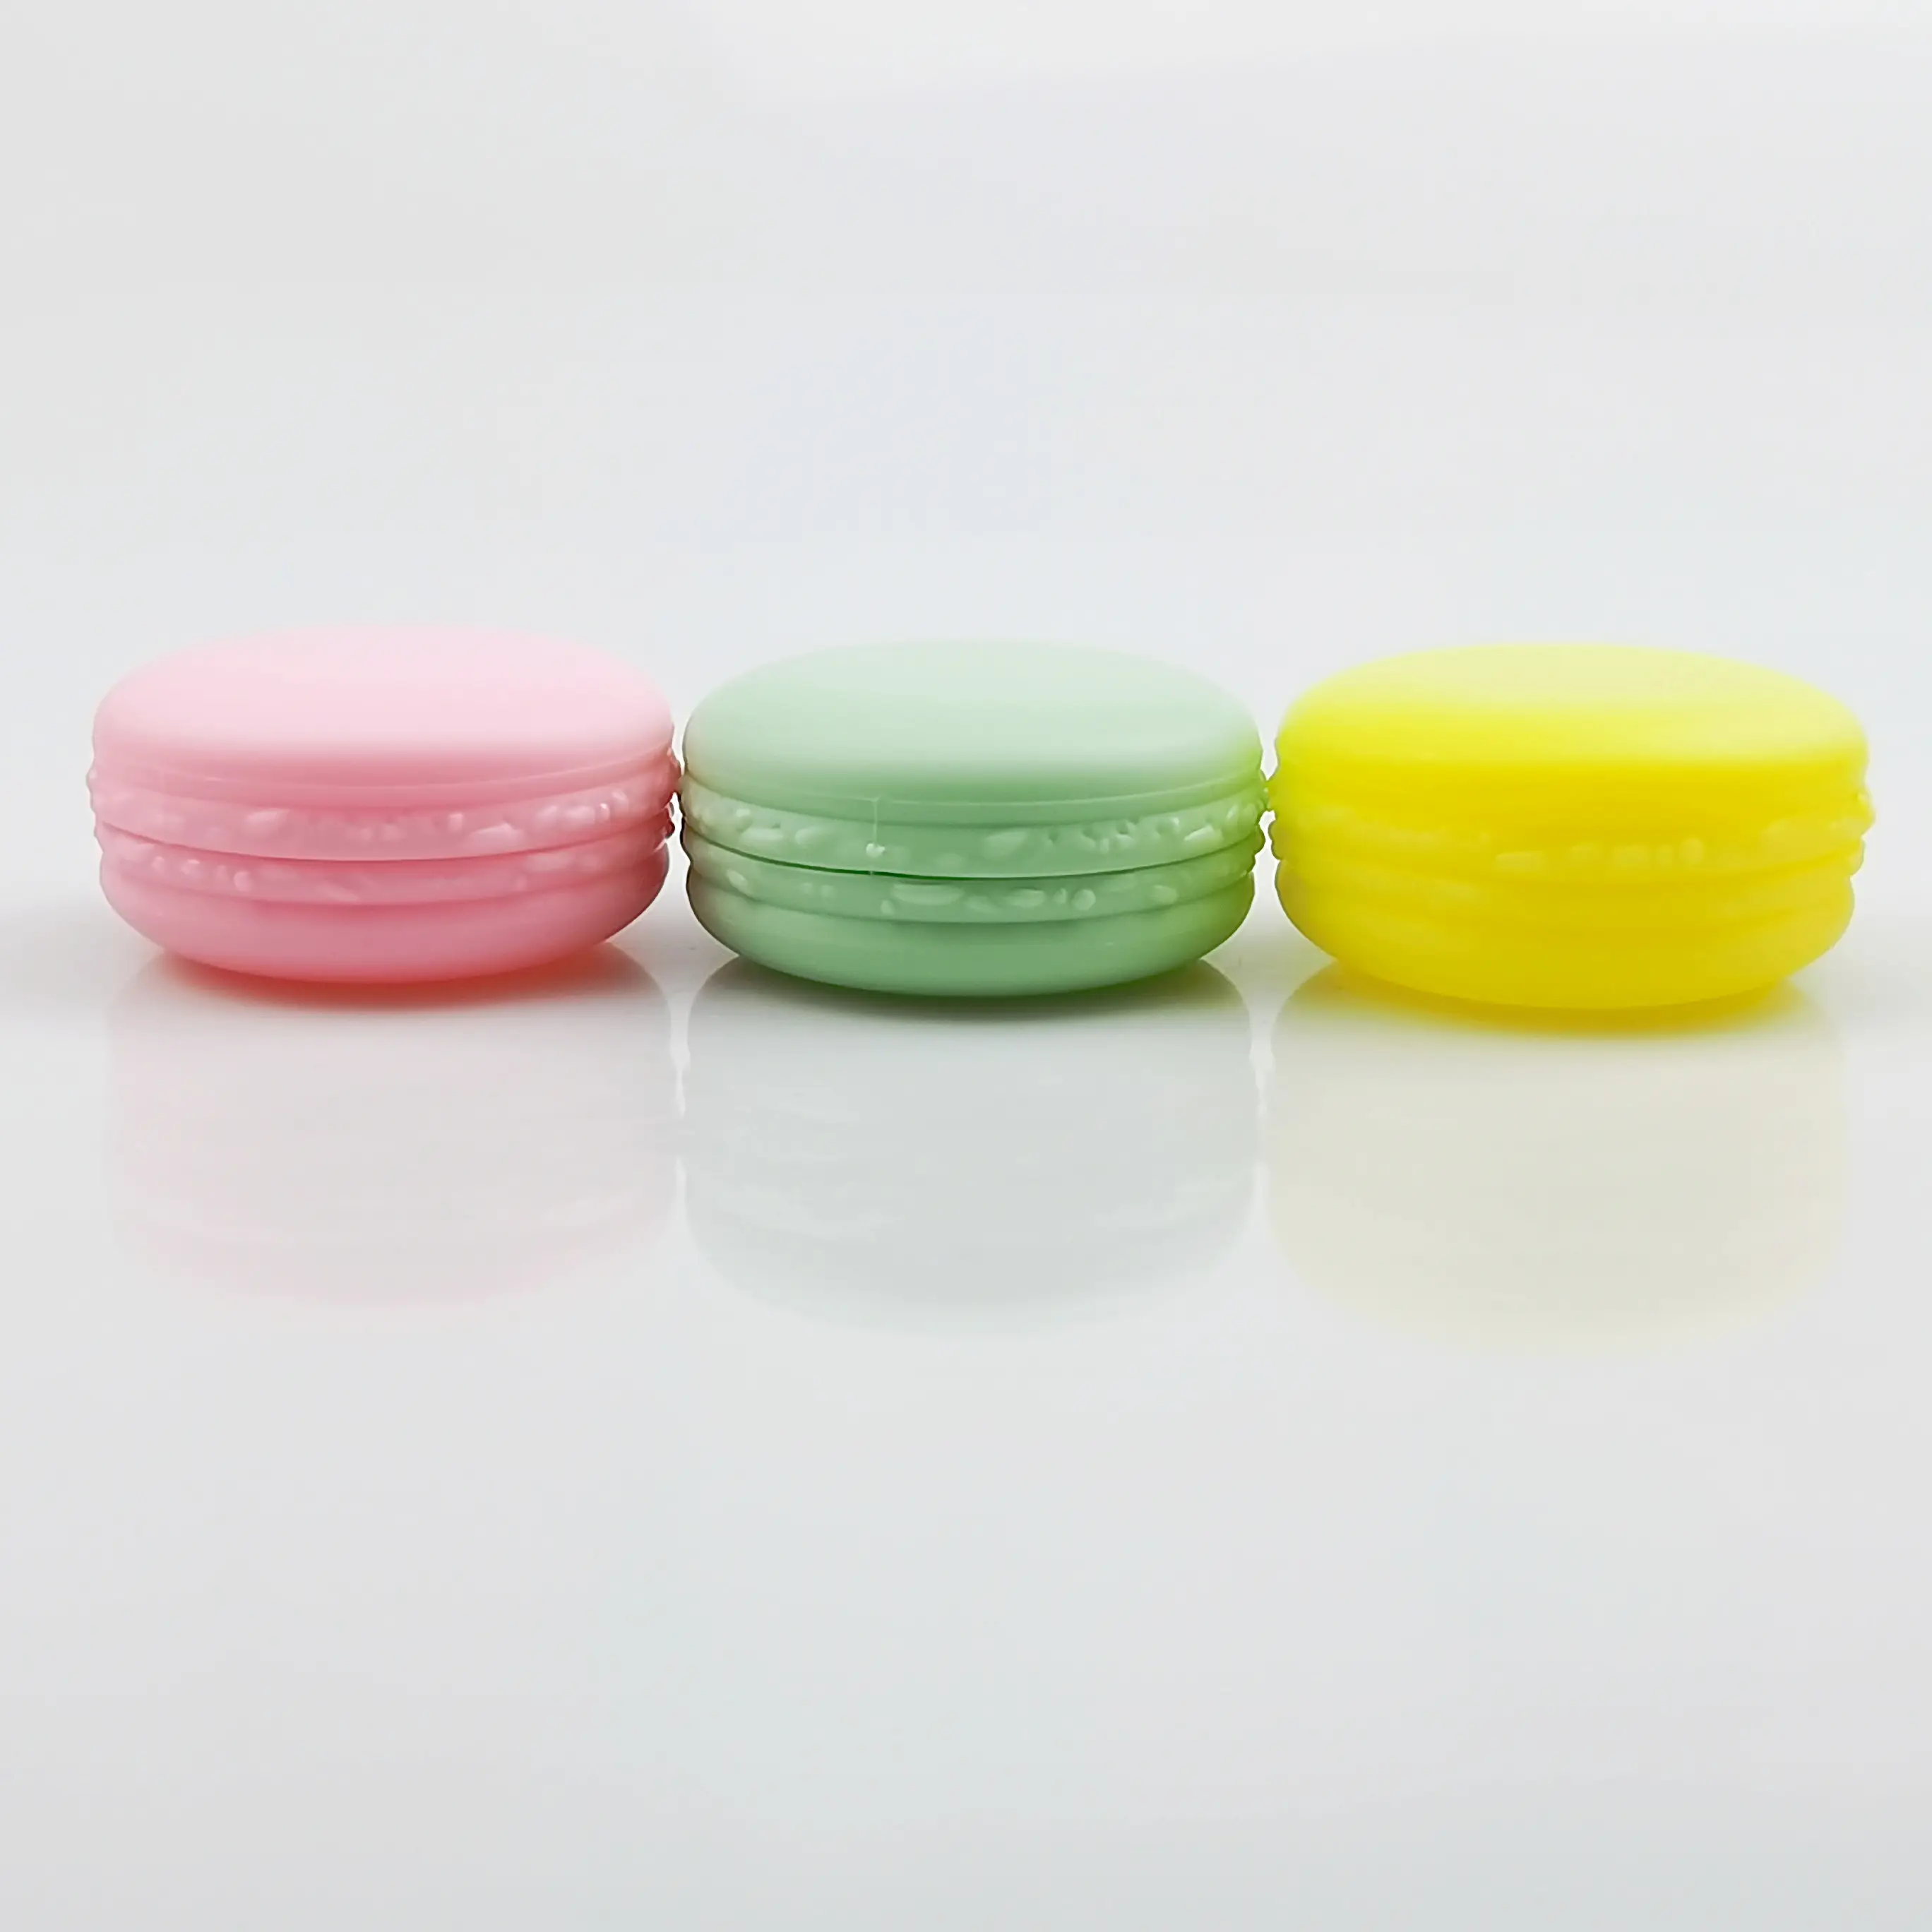 10g Macaron Shape Jar Empty Cosmetic Storage Bottle Makeup Lotion Cream Spice Travel Packaging Plastic Container Free Shipping